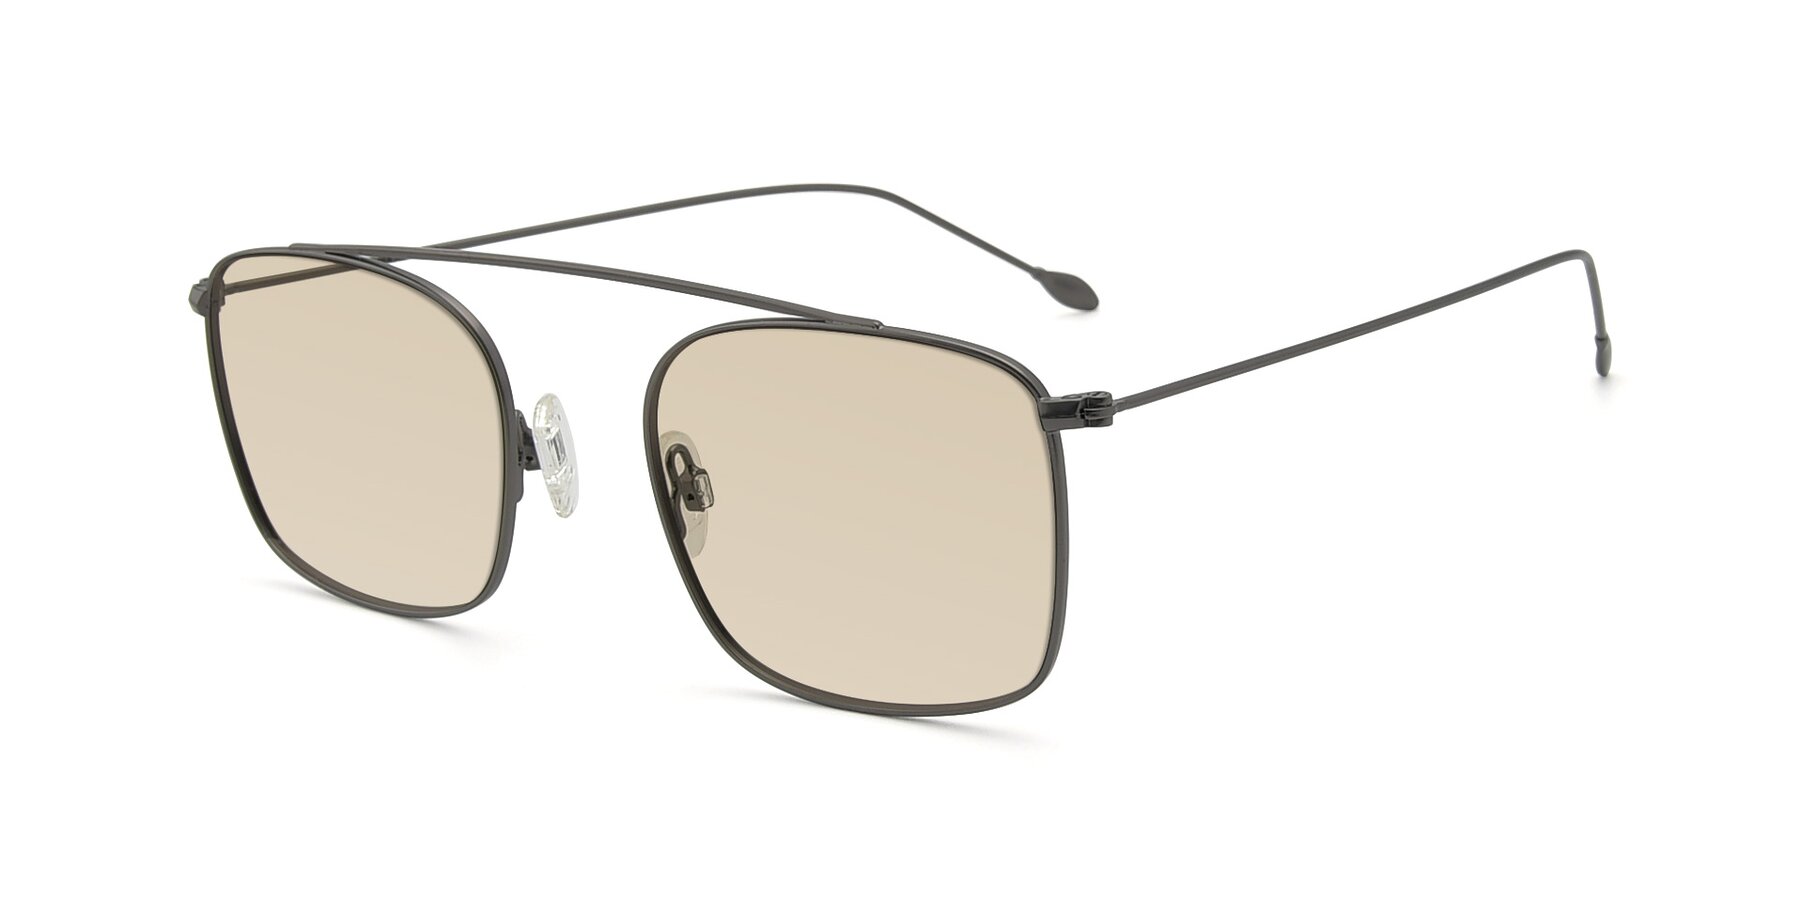 Angle of The Librarian in Gunmetal with Light Brown Tinted Lenses